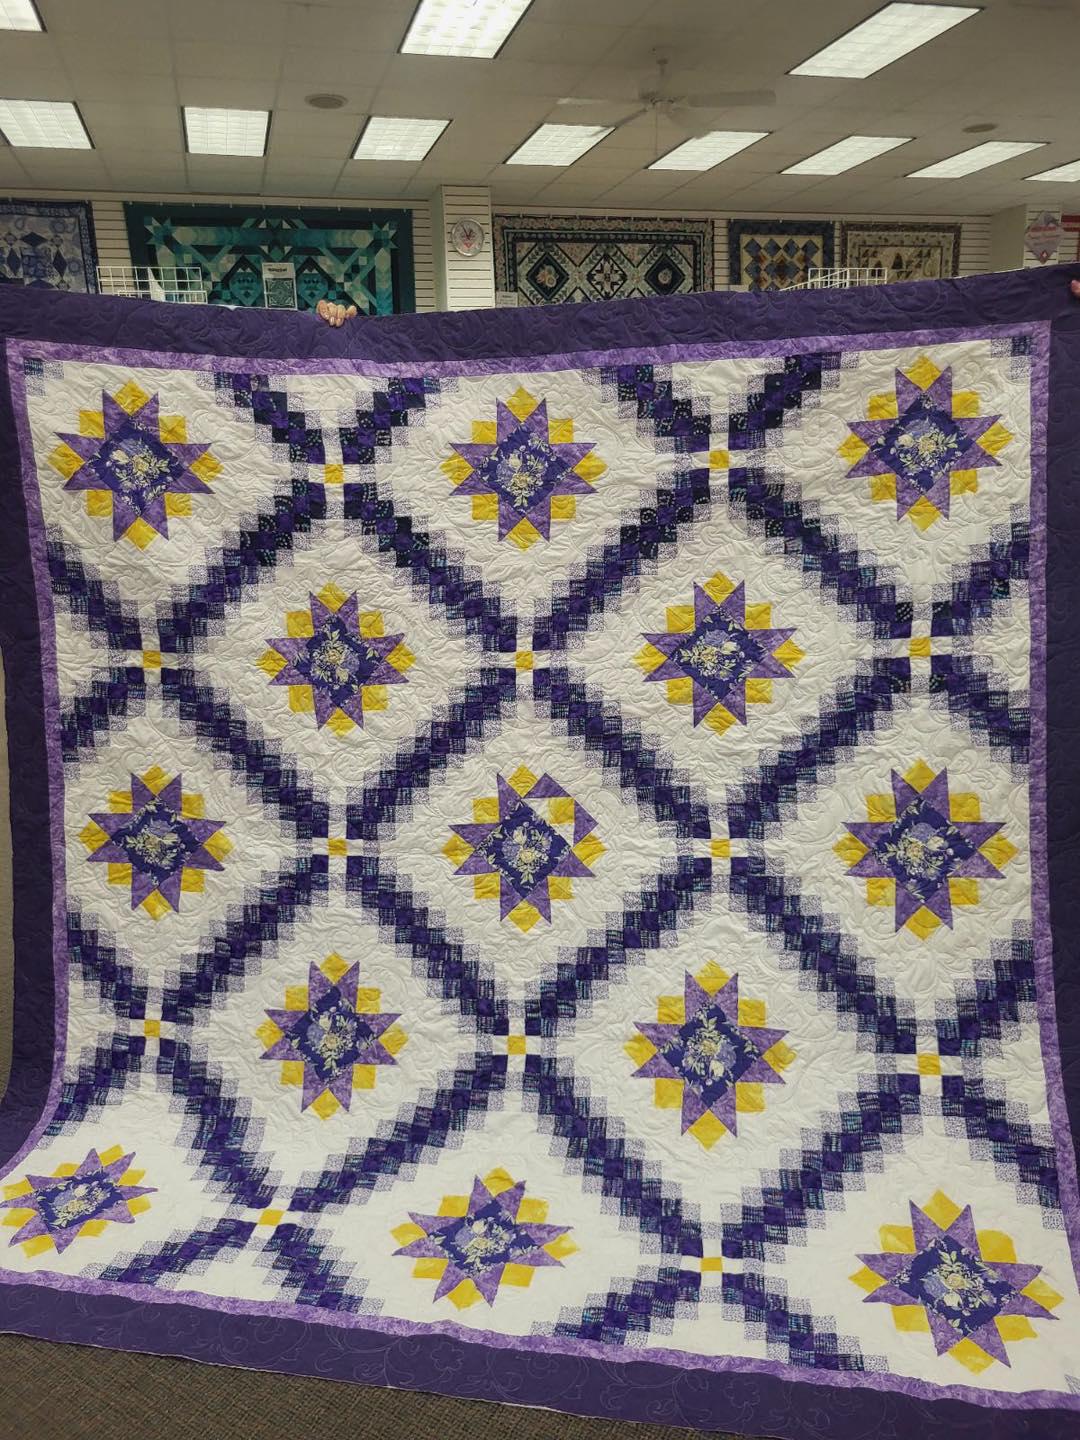 This beautiful quilt with all the purple colors is Ginger's and we quilted it.